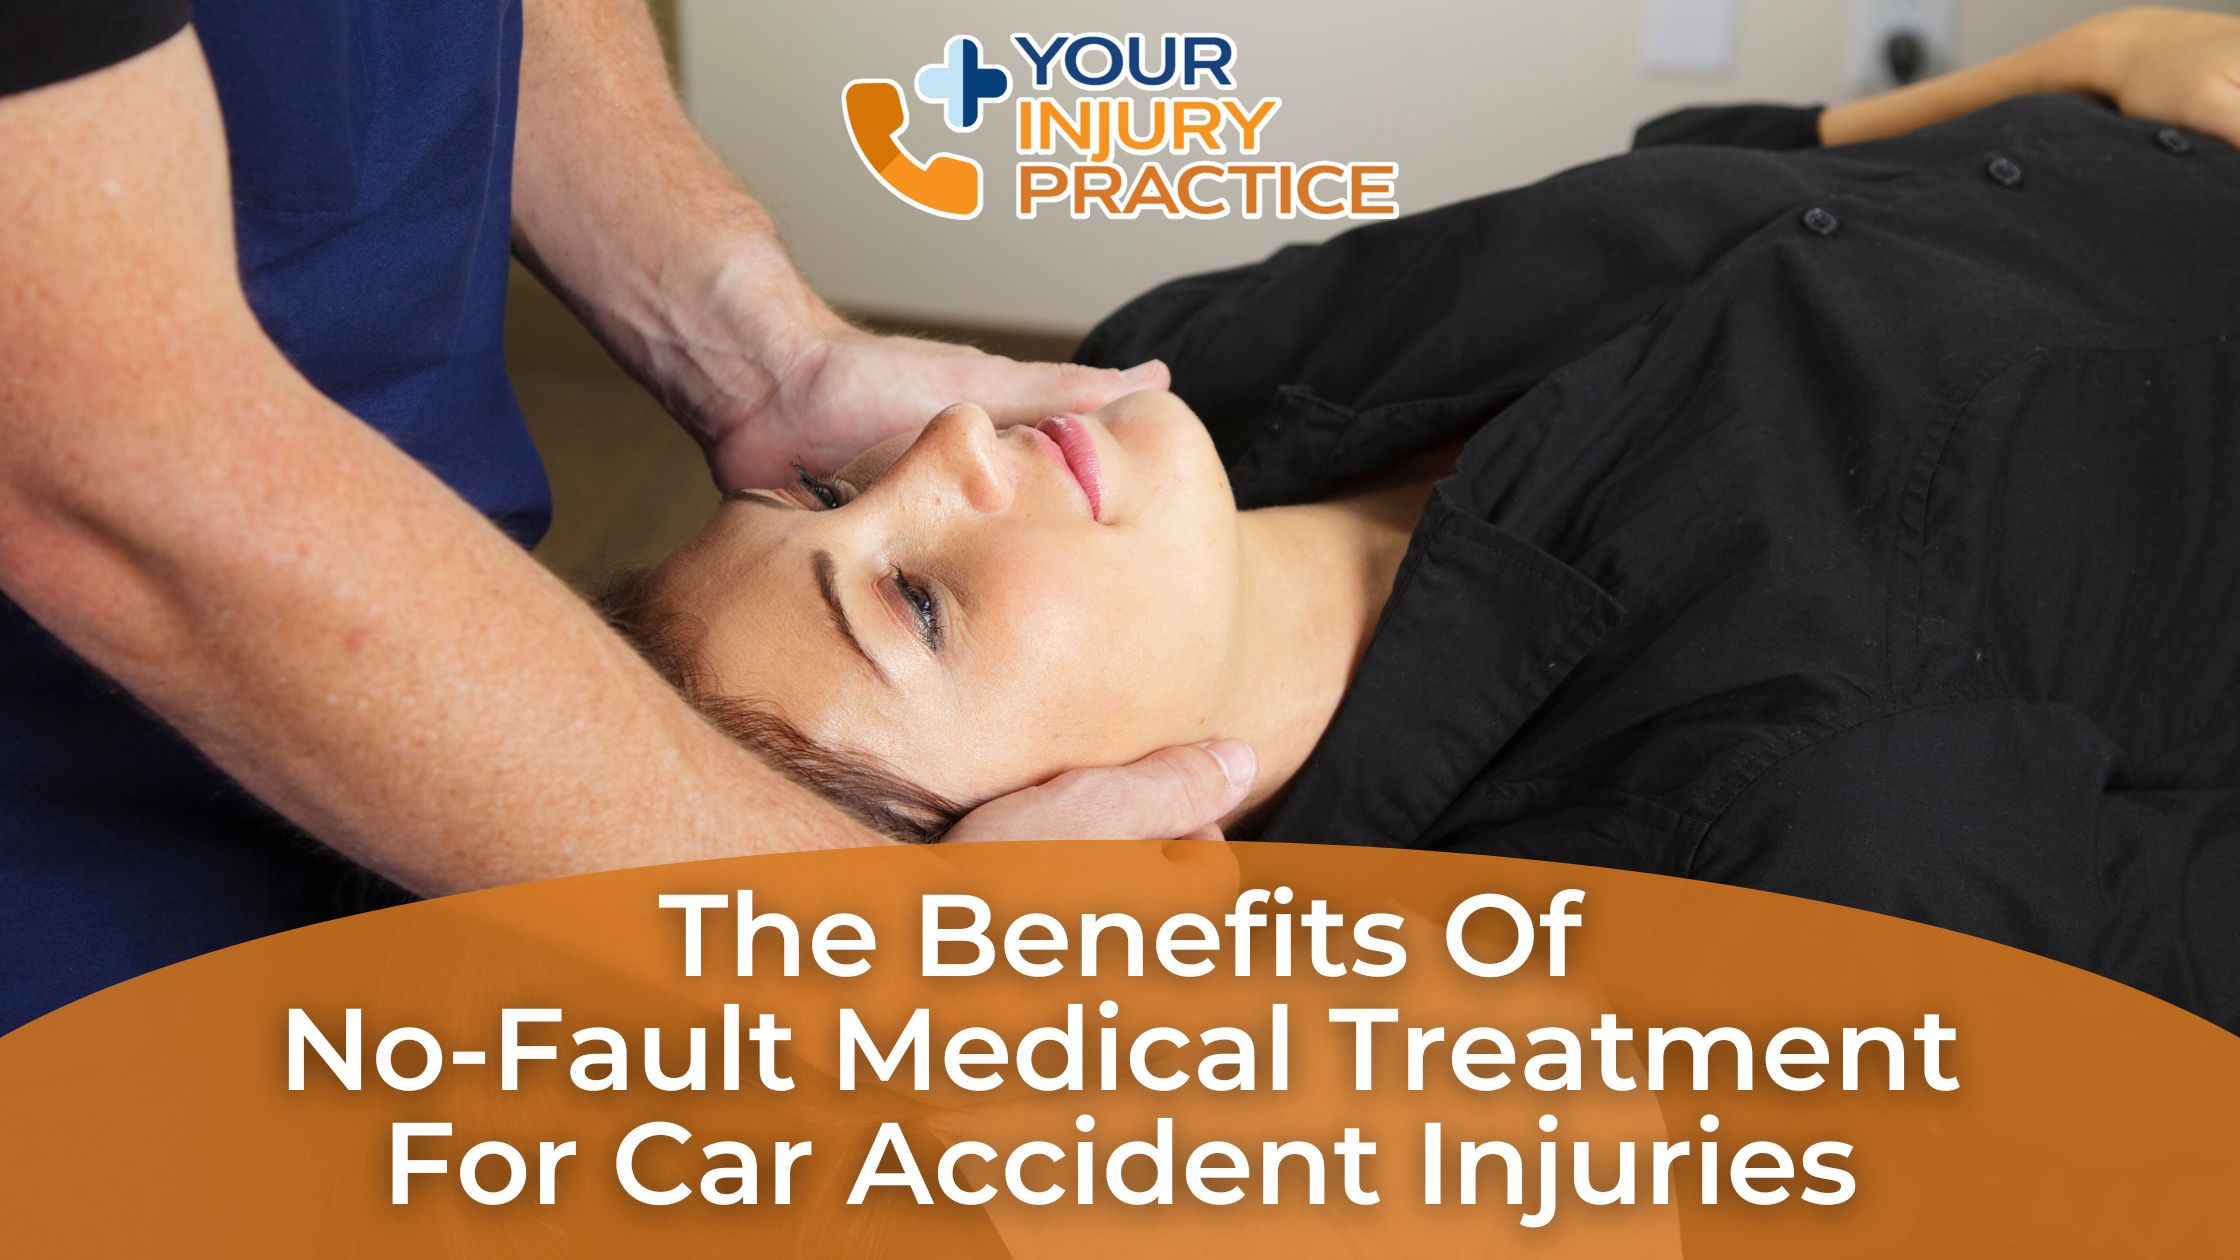 The Benefits of No-Fault Medical Treatment for Car Accident Injuries